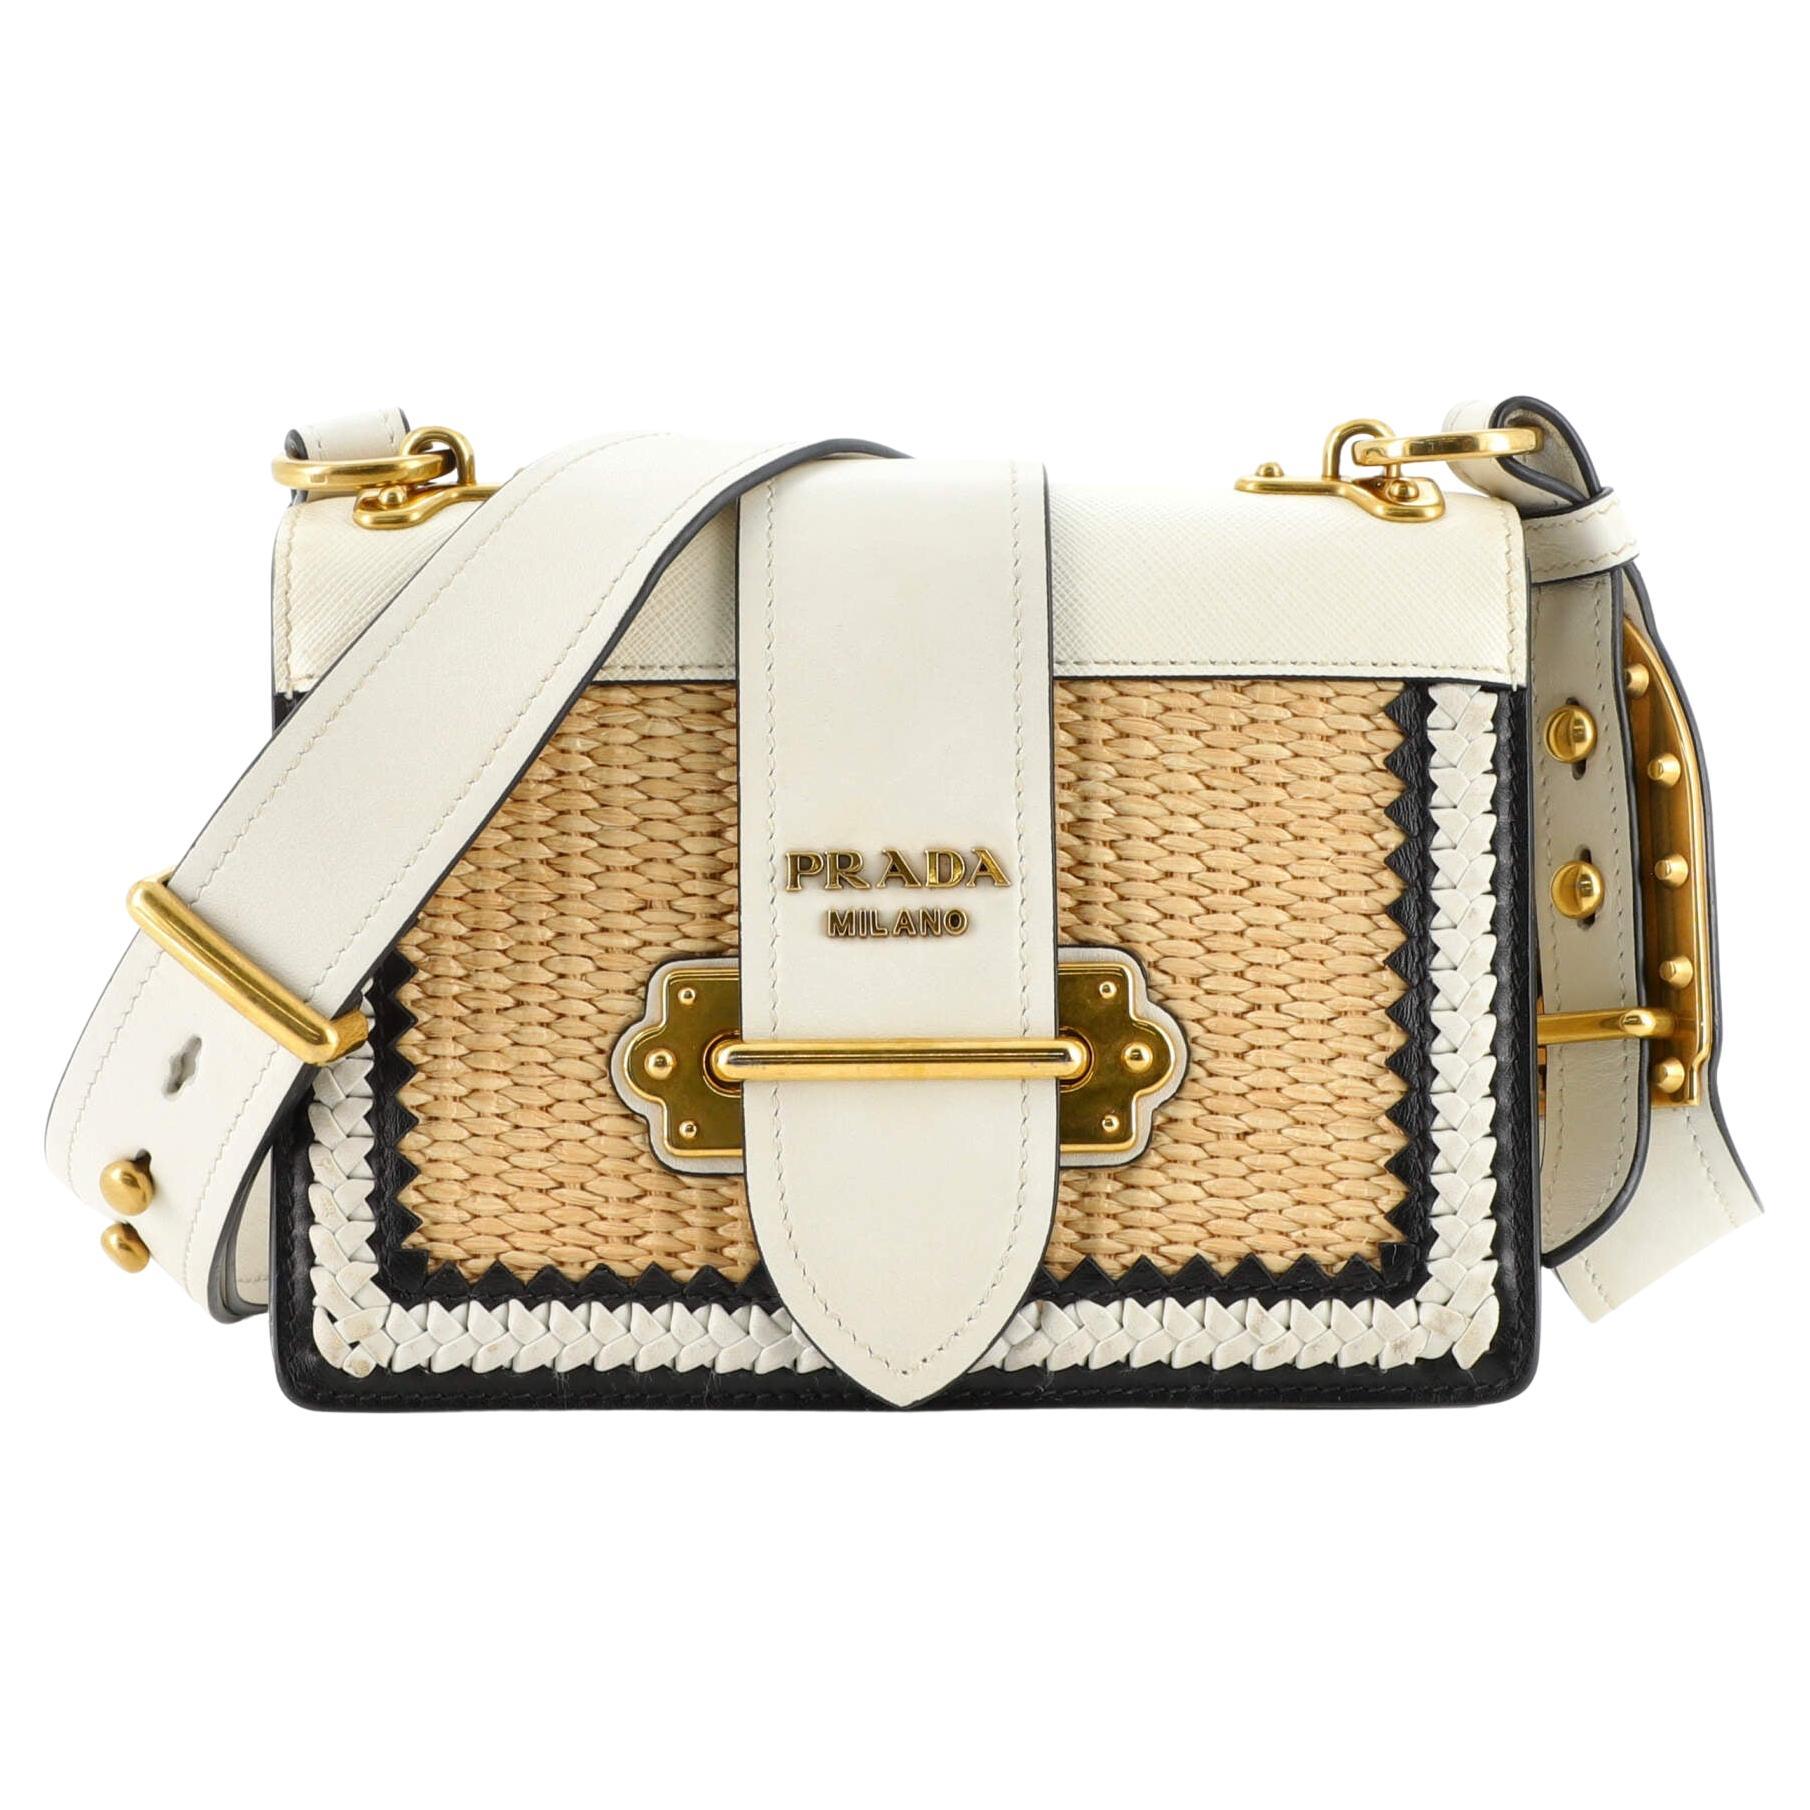 Cahier woven straw and leather bag TAN+WHITE Prada